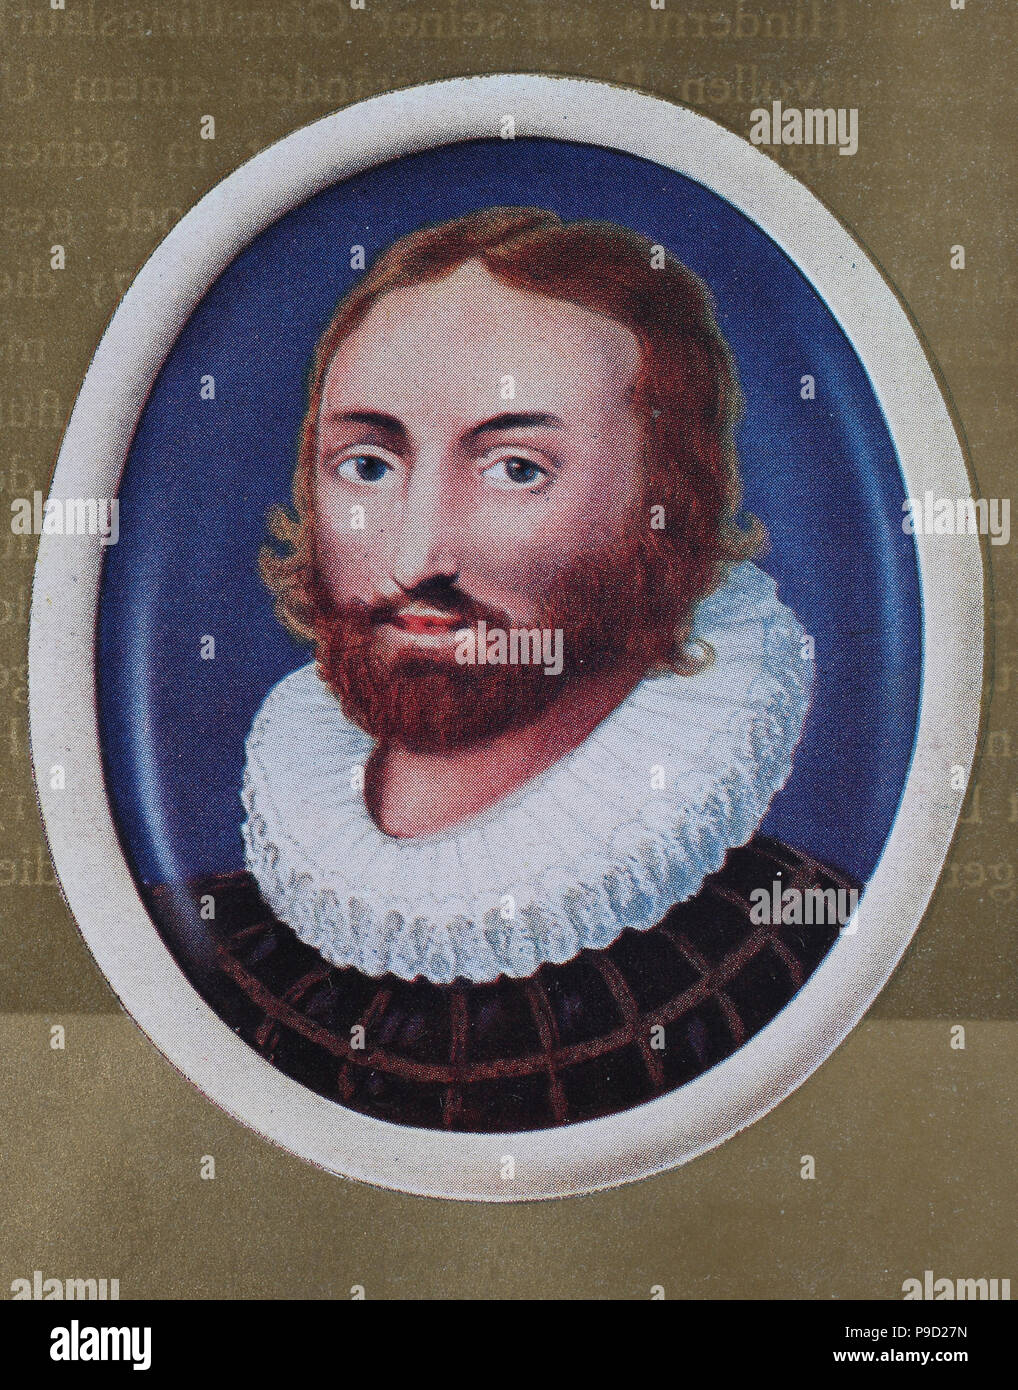 Edmund Spenser; 1552/1553 â€“ 13 January 1599 was an English poet best known for The Faerie Queene, an epic poem and fantastical allegory celebrating the Tudor dynasty and Elizabeth I, digital improved reproduction of an original print from the year 1900 Stock Photo